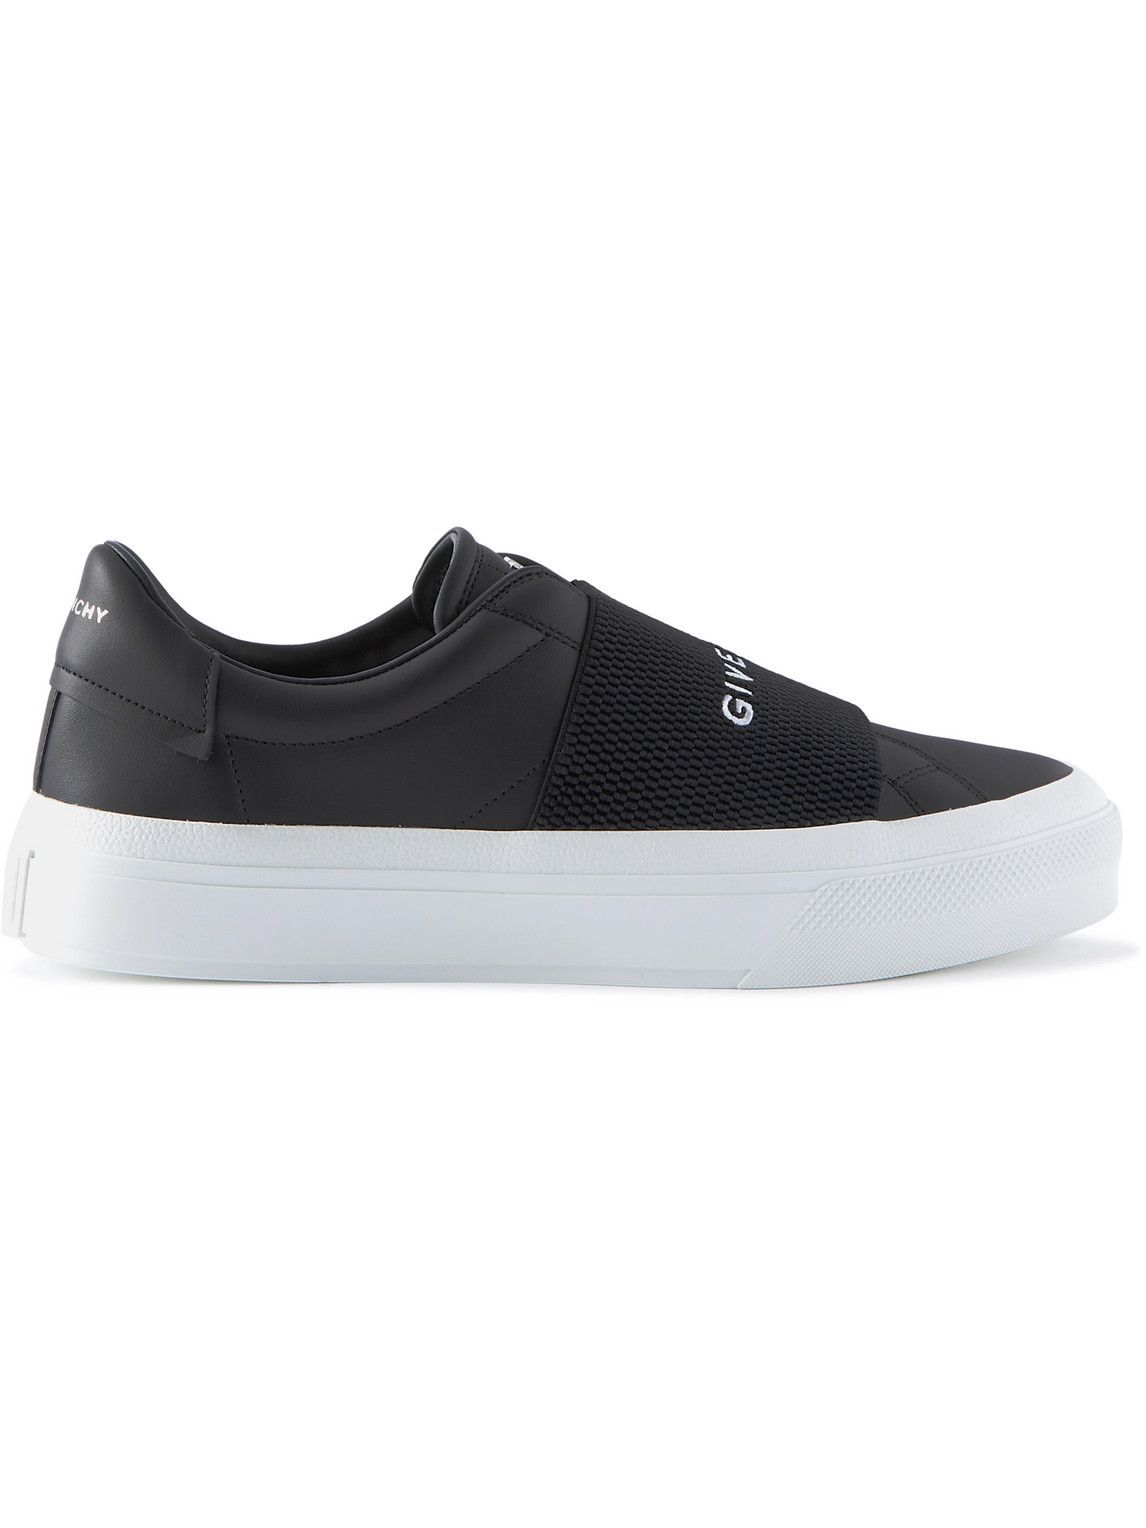 Givenchy - City Court Leather Sneakers - Black Givenchy